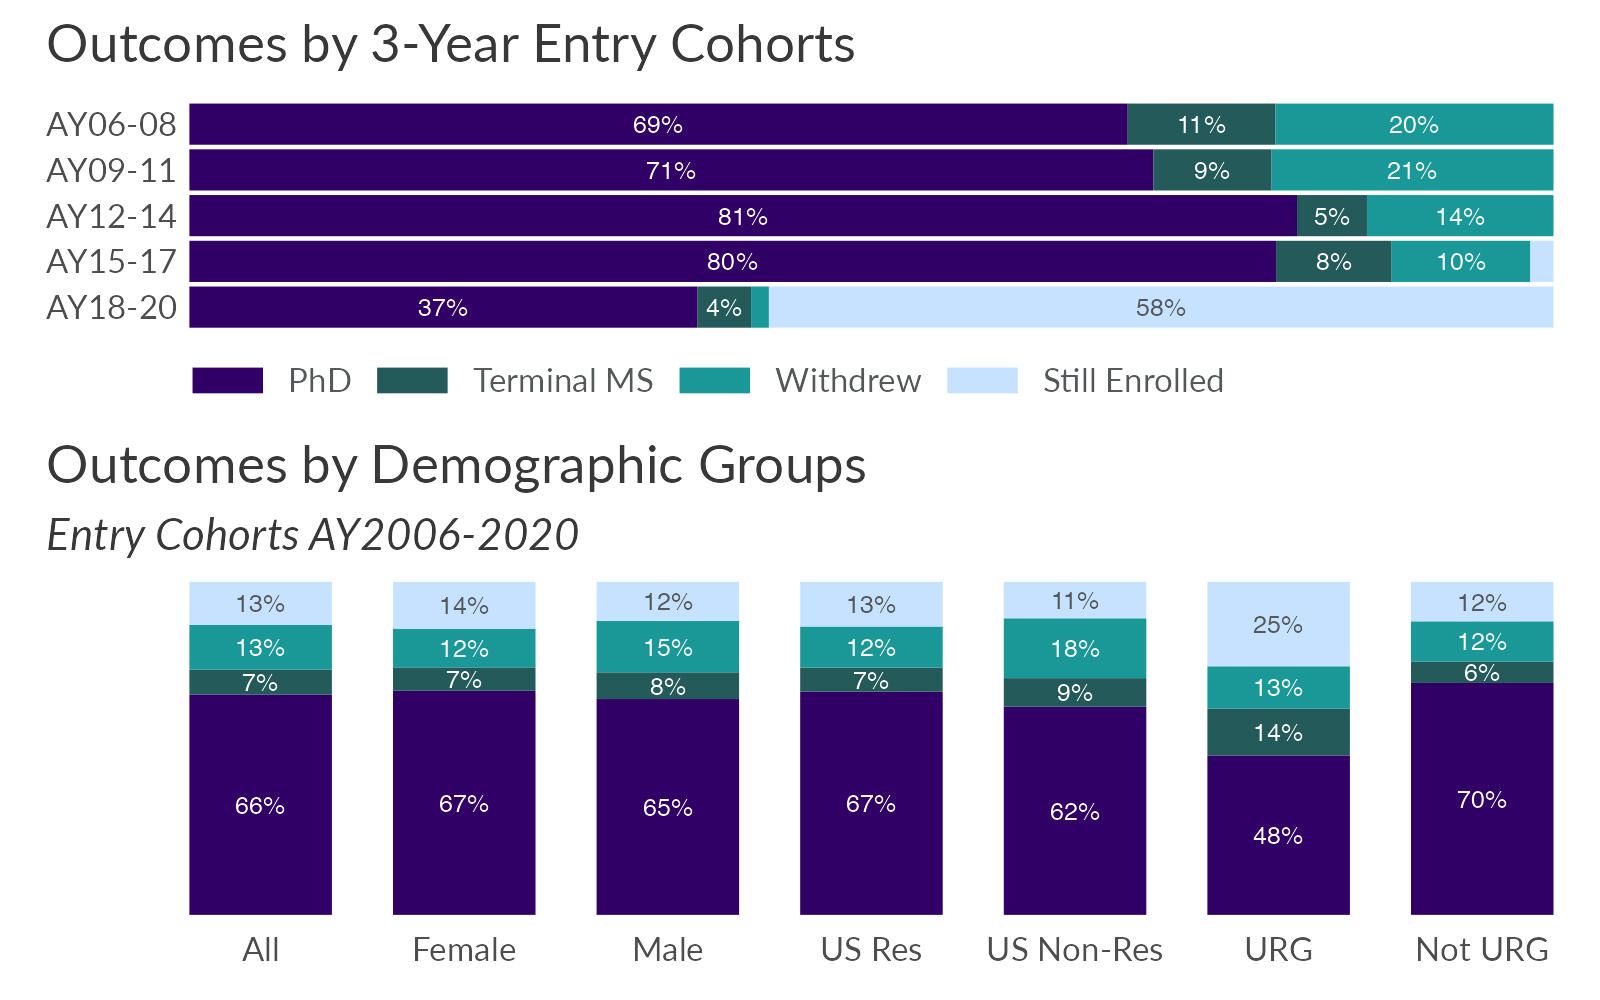 School of Medicine doctoral student completion outcomes by entry cohort groups and demographics for entry cohorts from AY 2006 through AY 2020